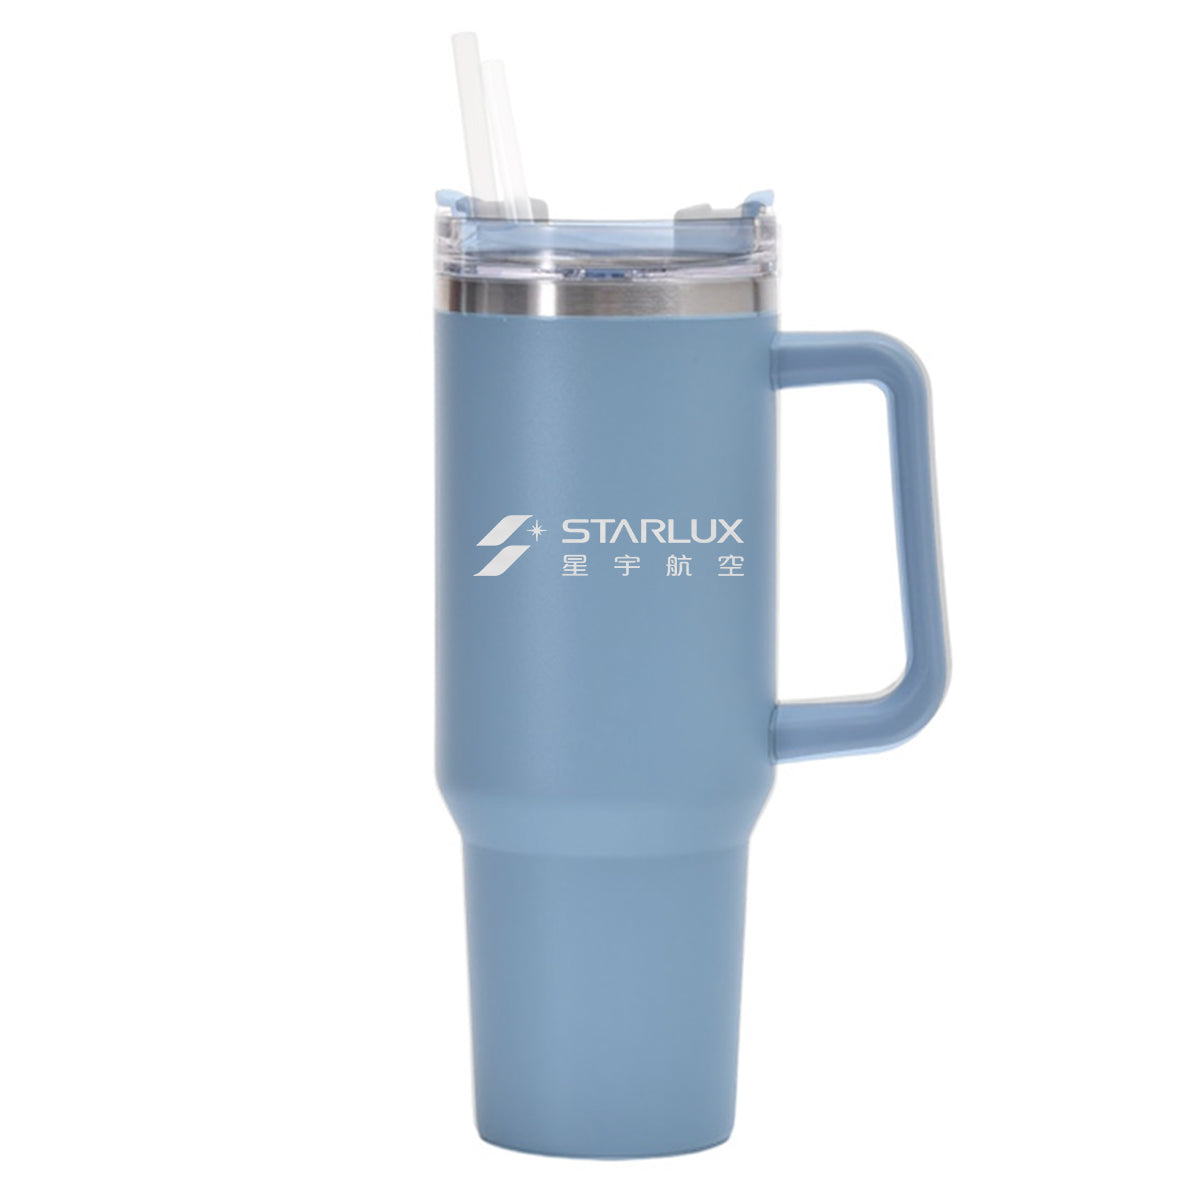 STARLUX Airlines Designed 40oz Stainless Steel Car Mug With Holder